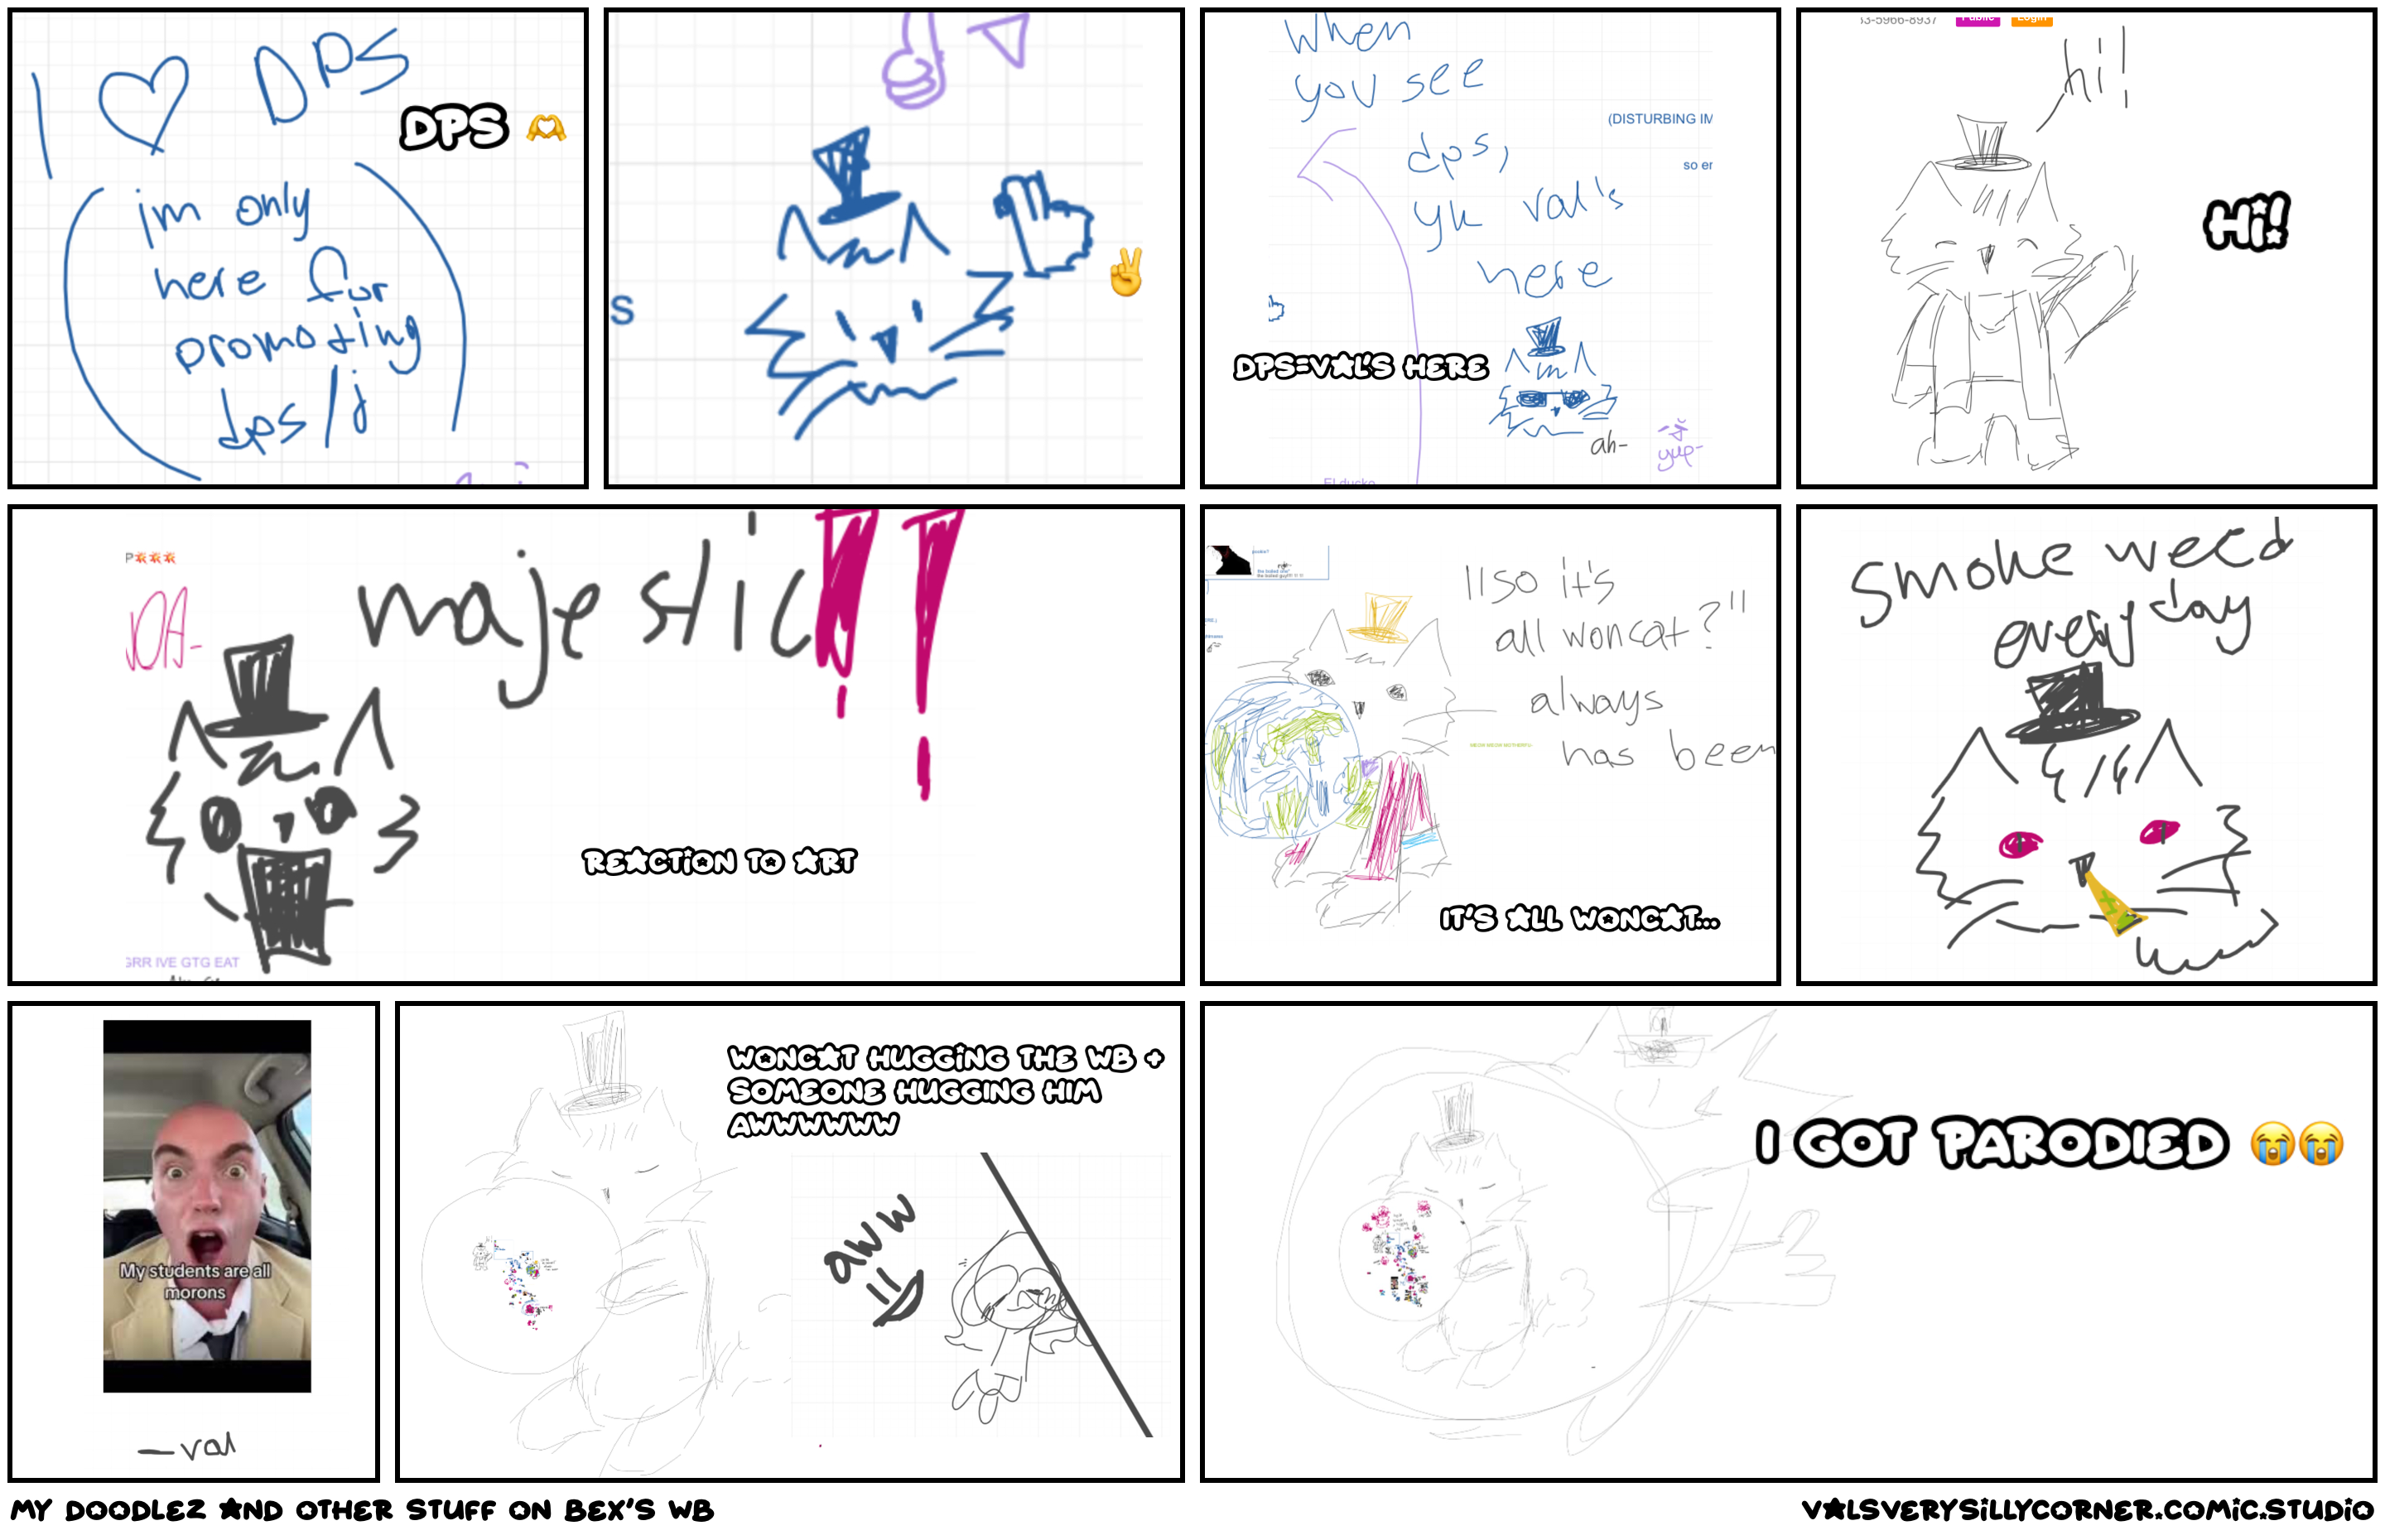 my doodlez and other stuff on bex’s wb